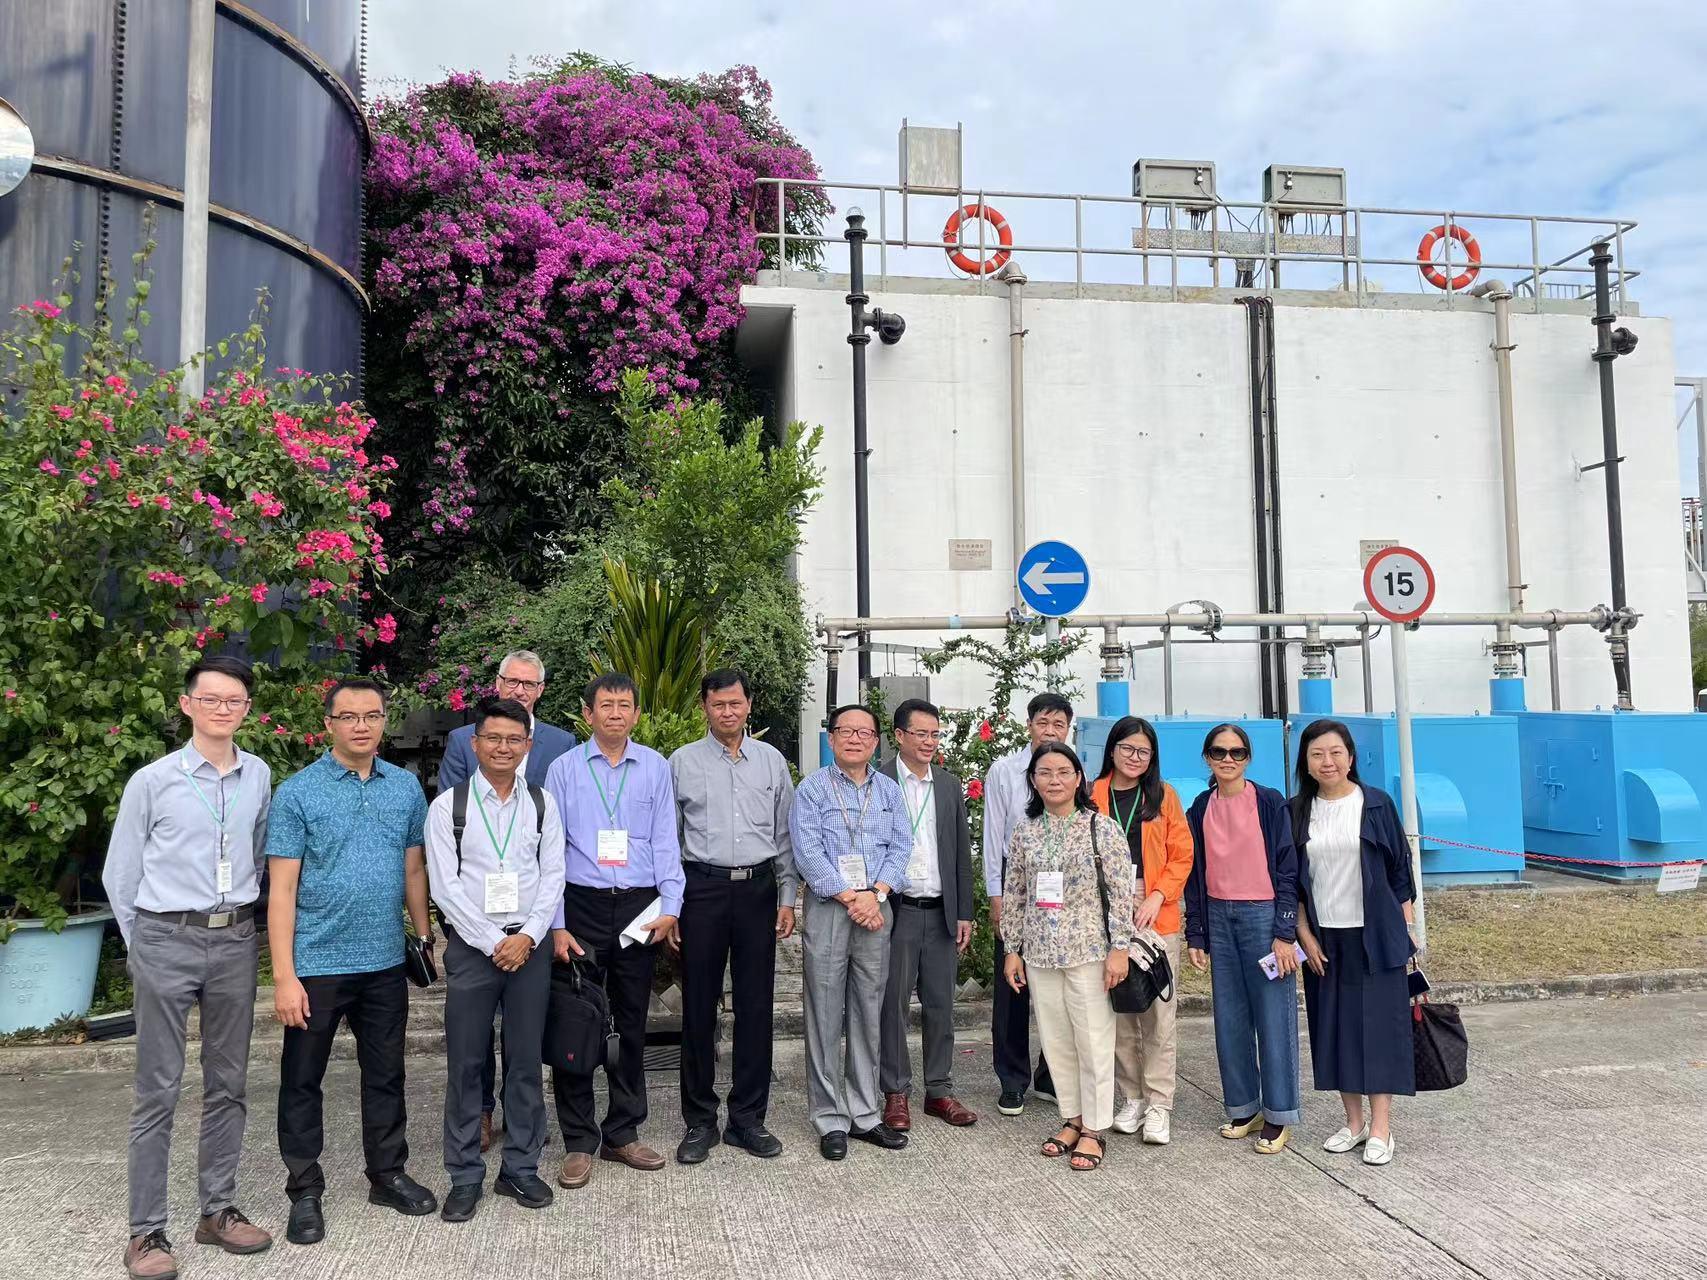 The Environmental Protection Department (EPD) arranged delegations from the Belt and Road (B&R) countries (namely Laos, Vietnam and Myanmar) and representatives from the Research Center for Eco-Environmental Sciences of the Chinese Academy of Sciences attending Eco Expo Asia to visit local aquaculture farms, water treatment works and sewage treatment facilities. Photo shows the B&R delegations visiting Hong Kong International Airport's "Triple Water System" with EPD officers on October 27.